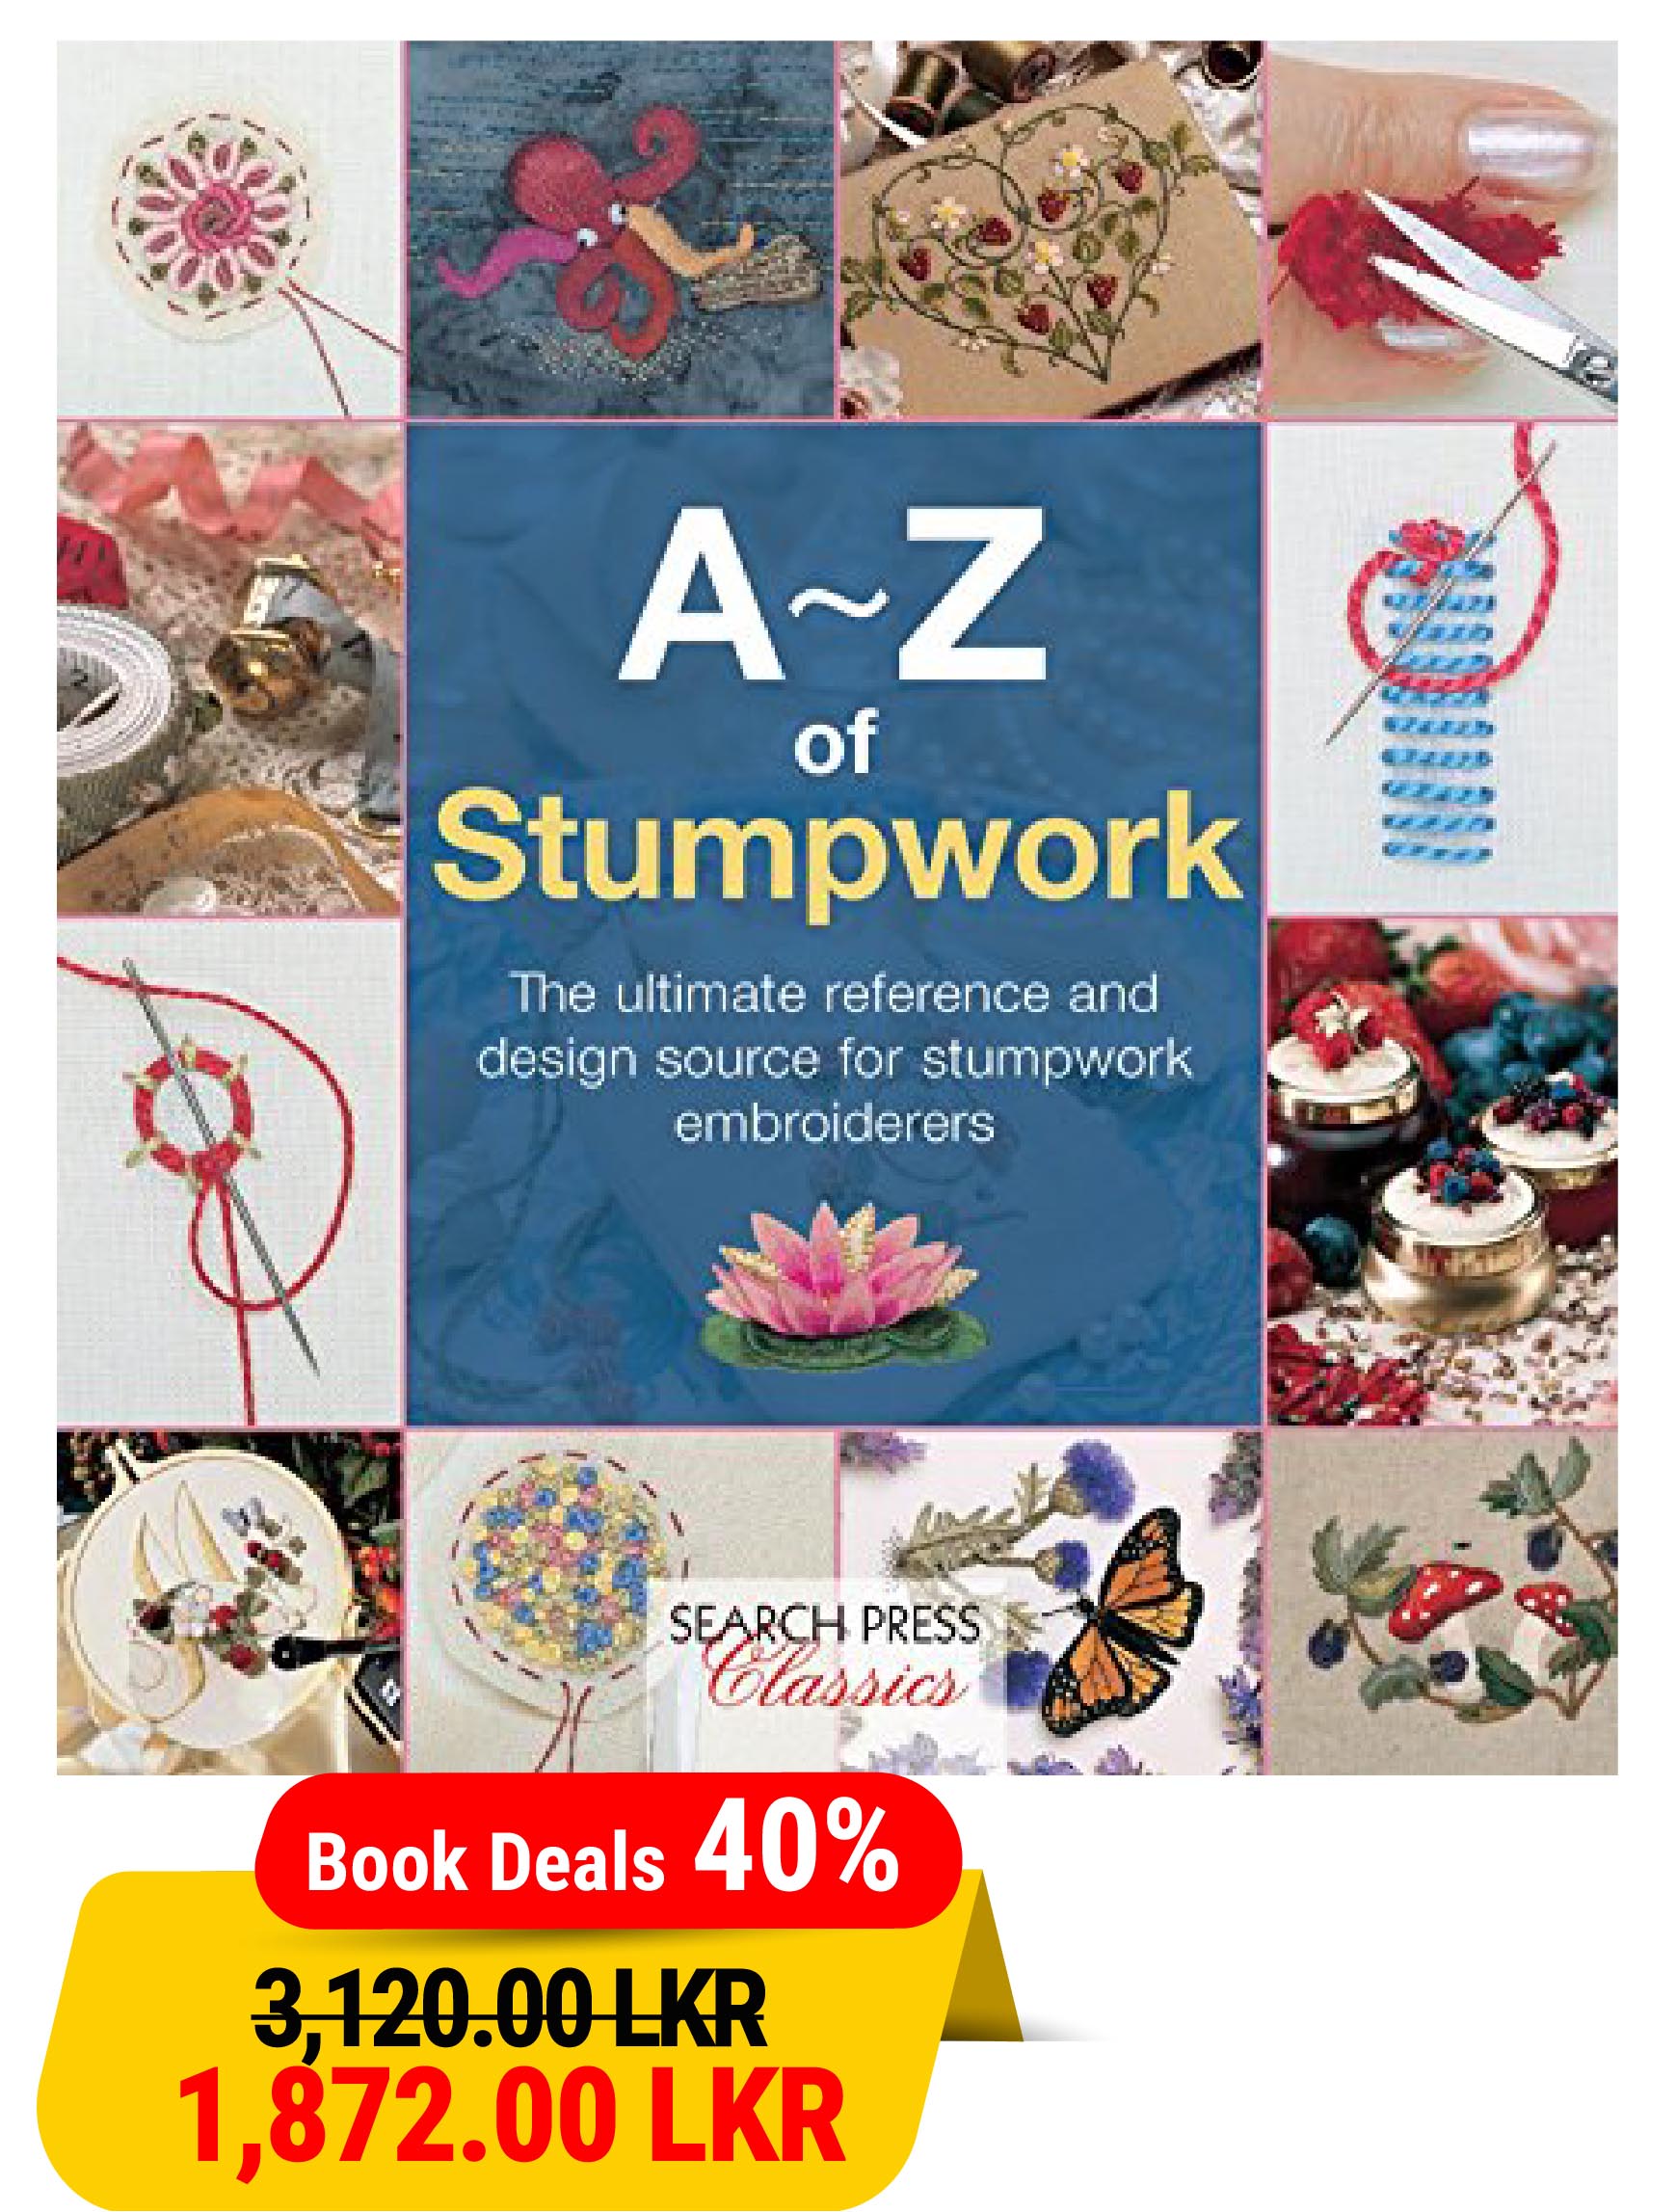 A-Z of Stumpwork: The Ultimate Reference and Design Source for Stumpwork Embroiderers